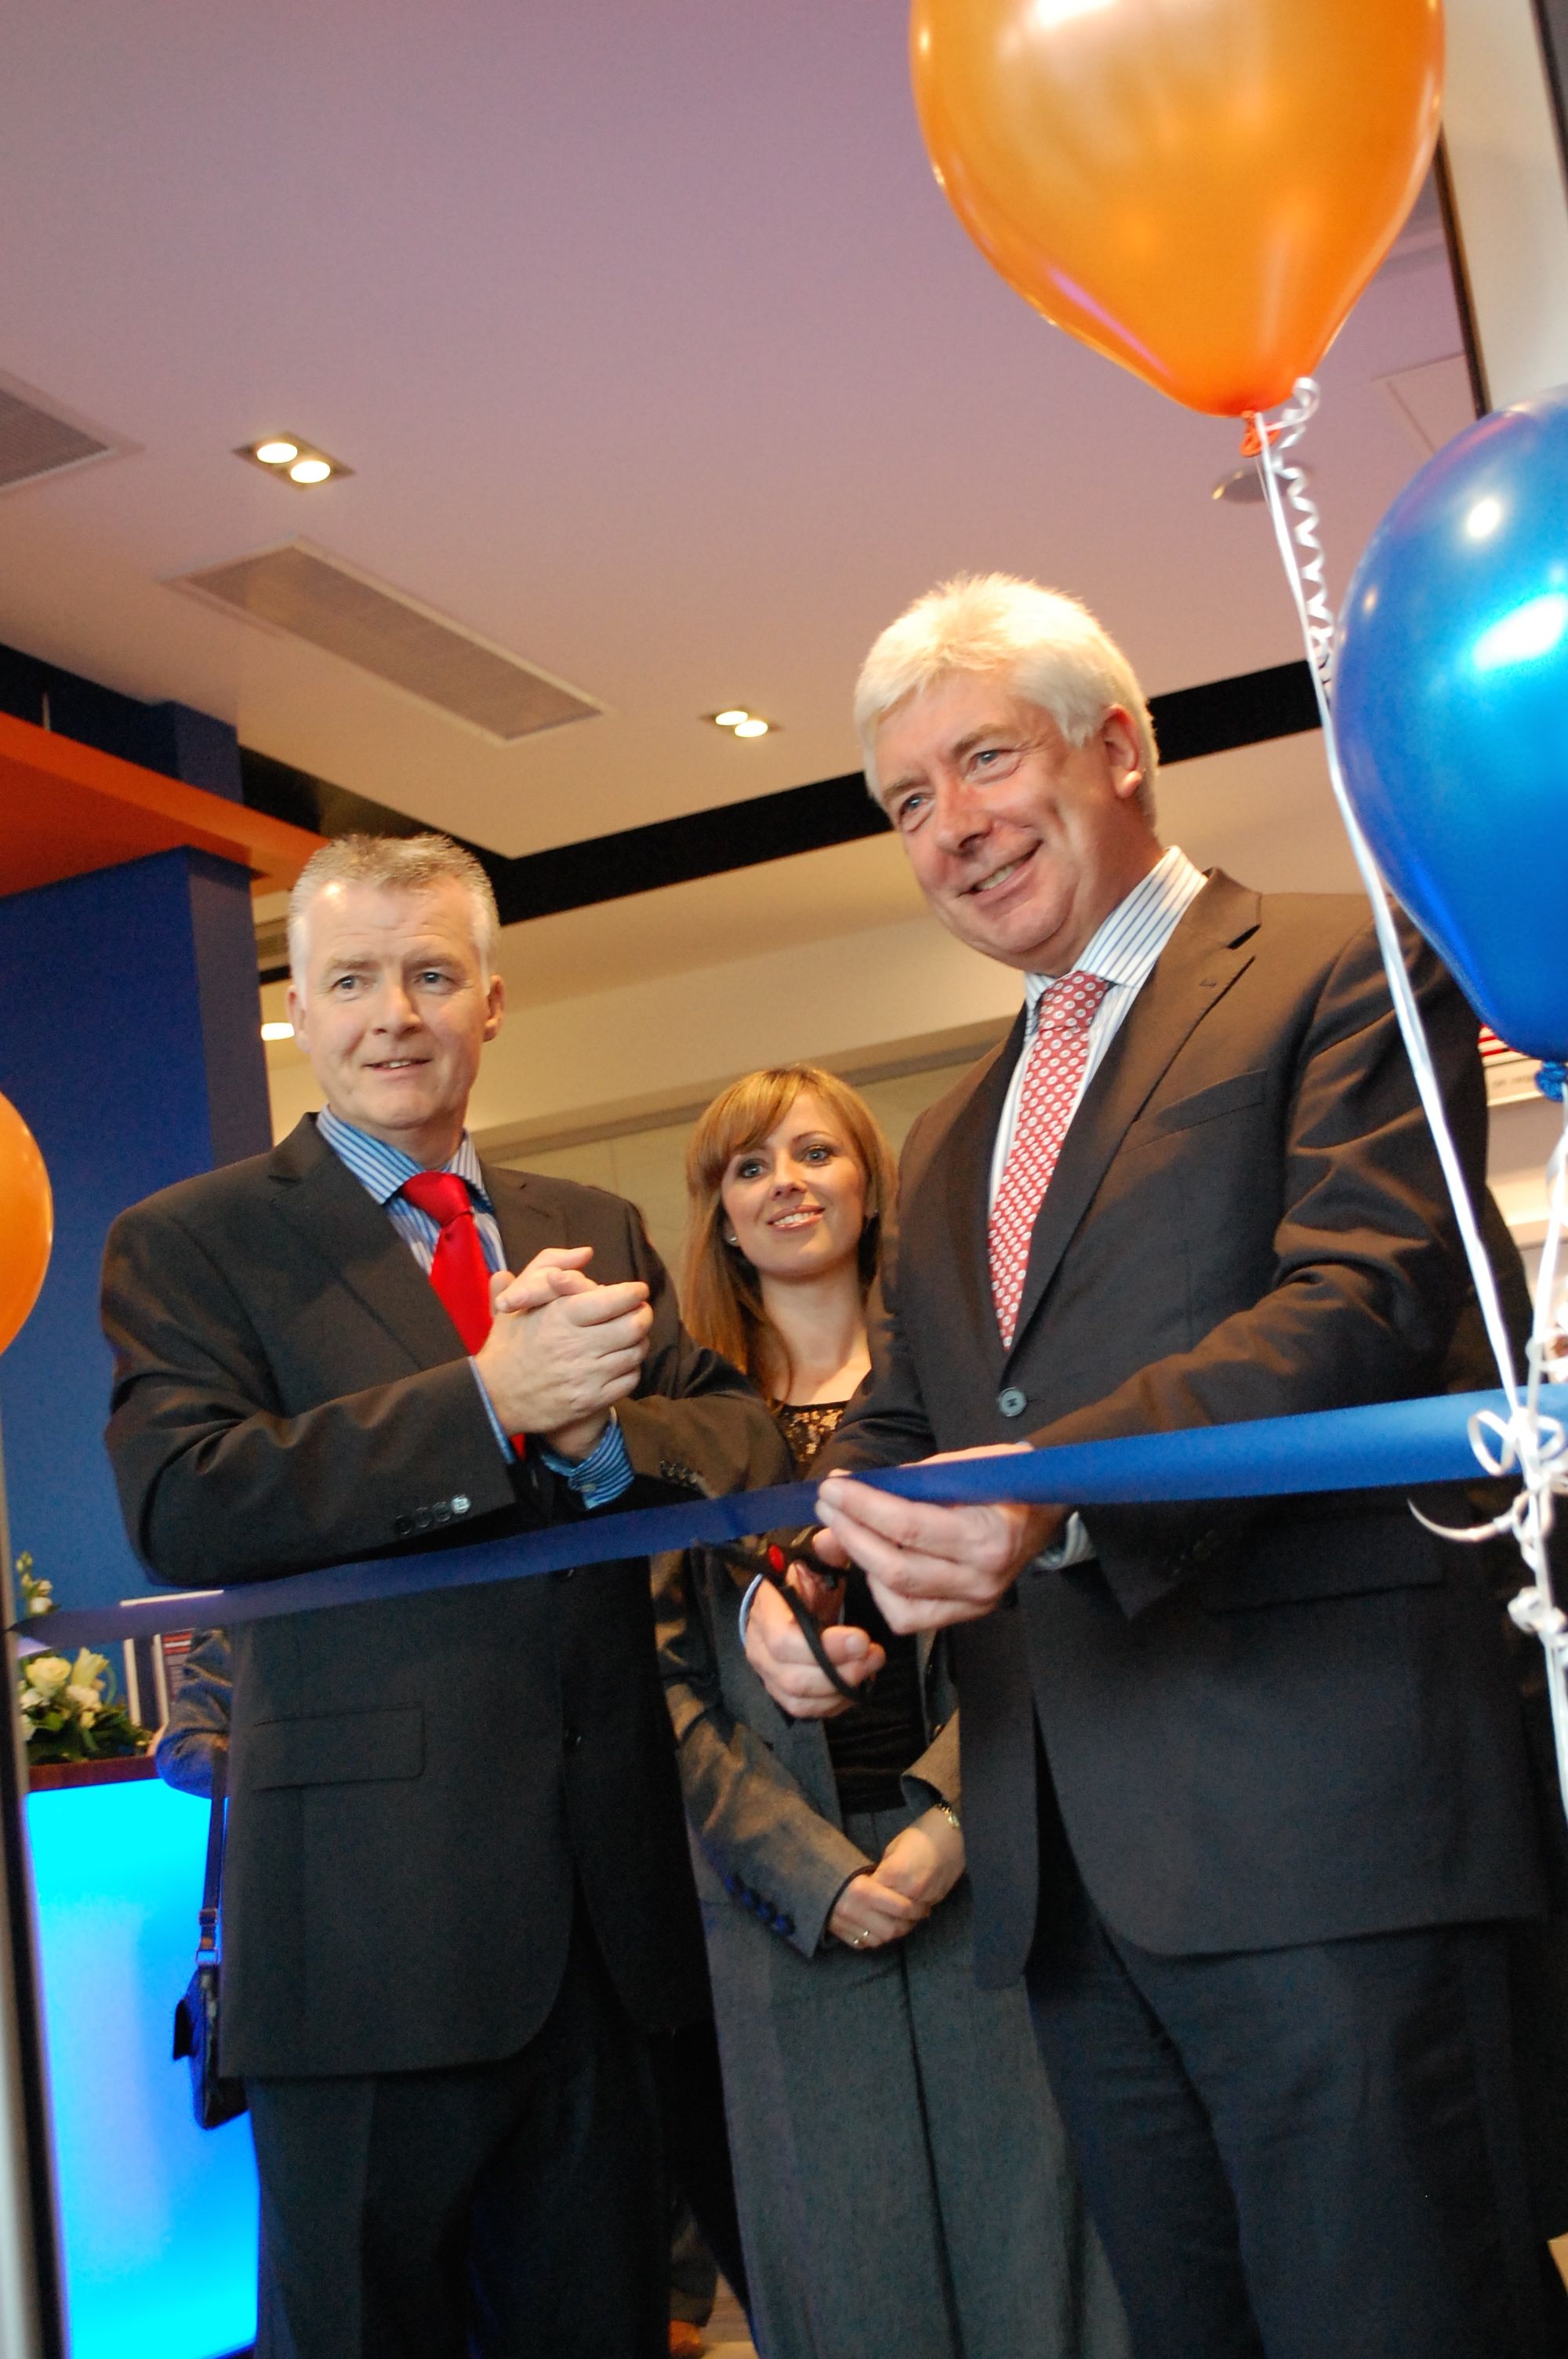 Re-Opening the Permanent TSB Branch in Dundrum